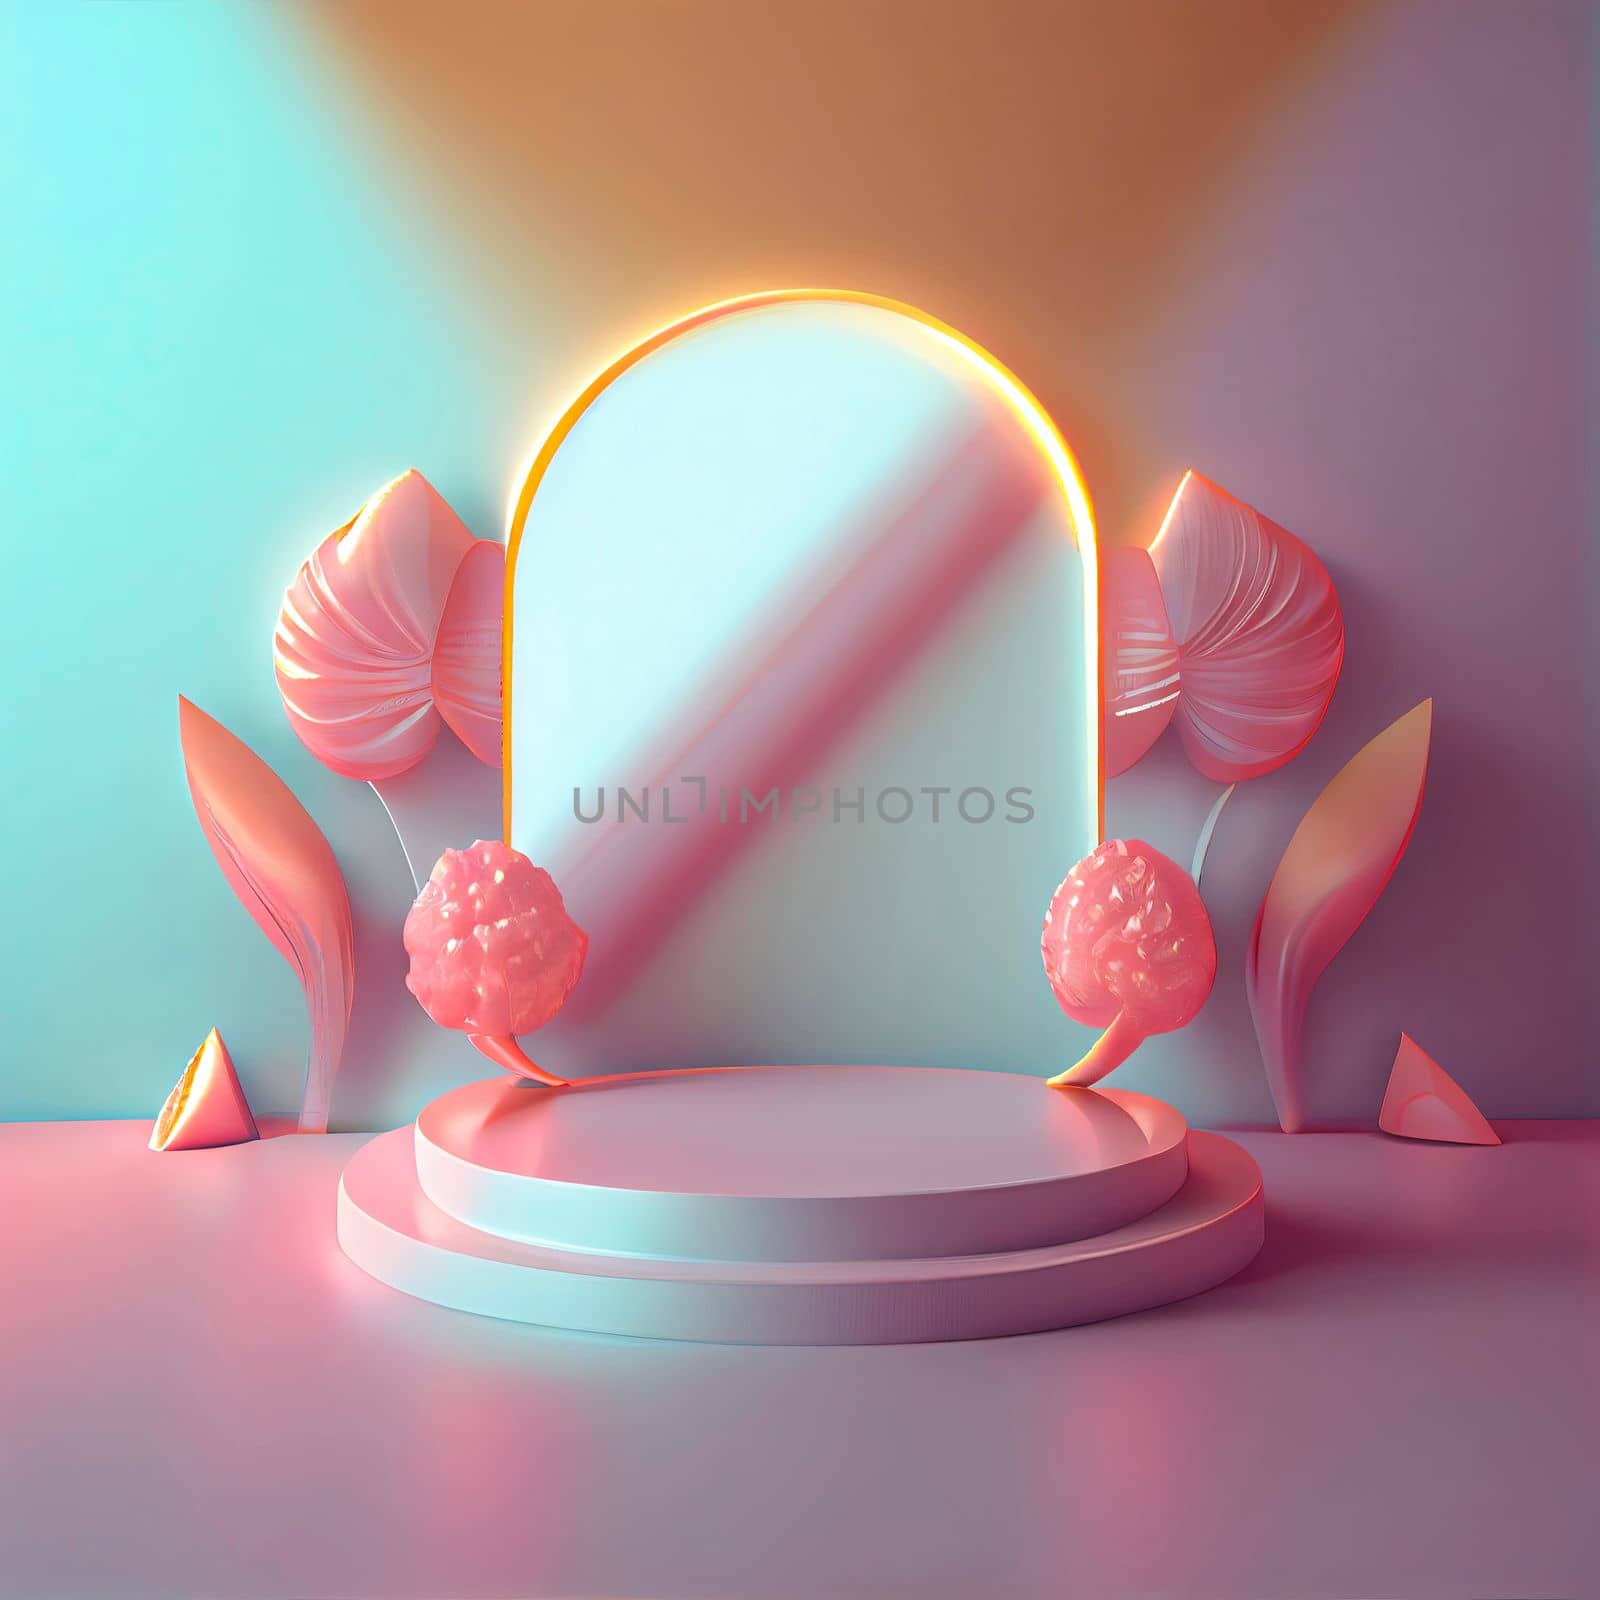 3d illustration of podium with abstract flower wreath ornament for shop product promotion